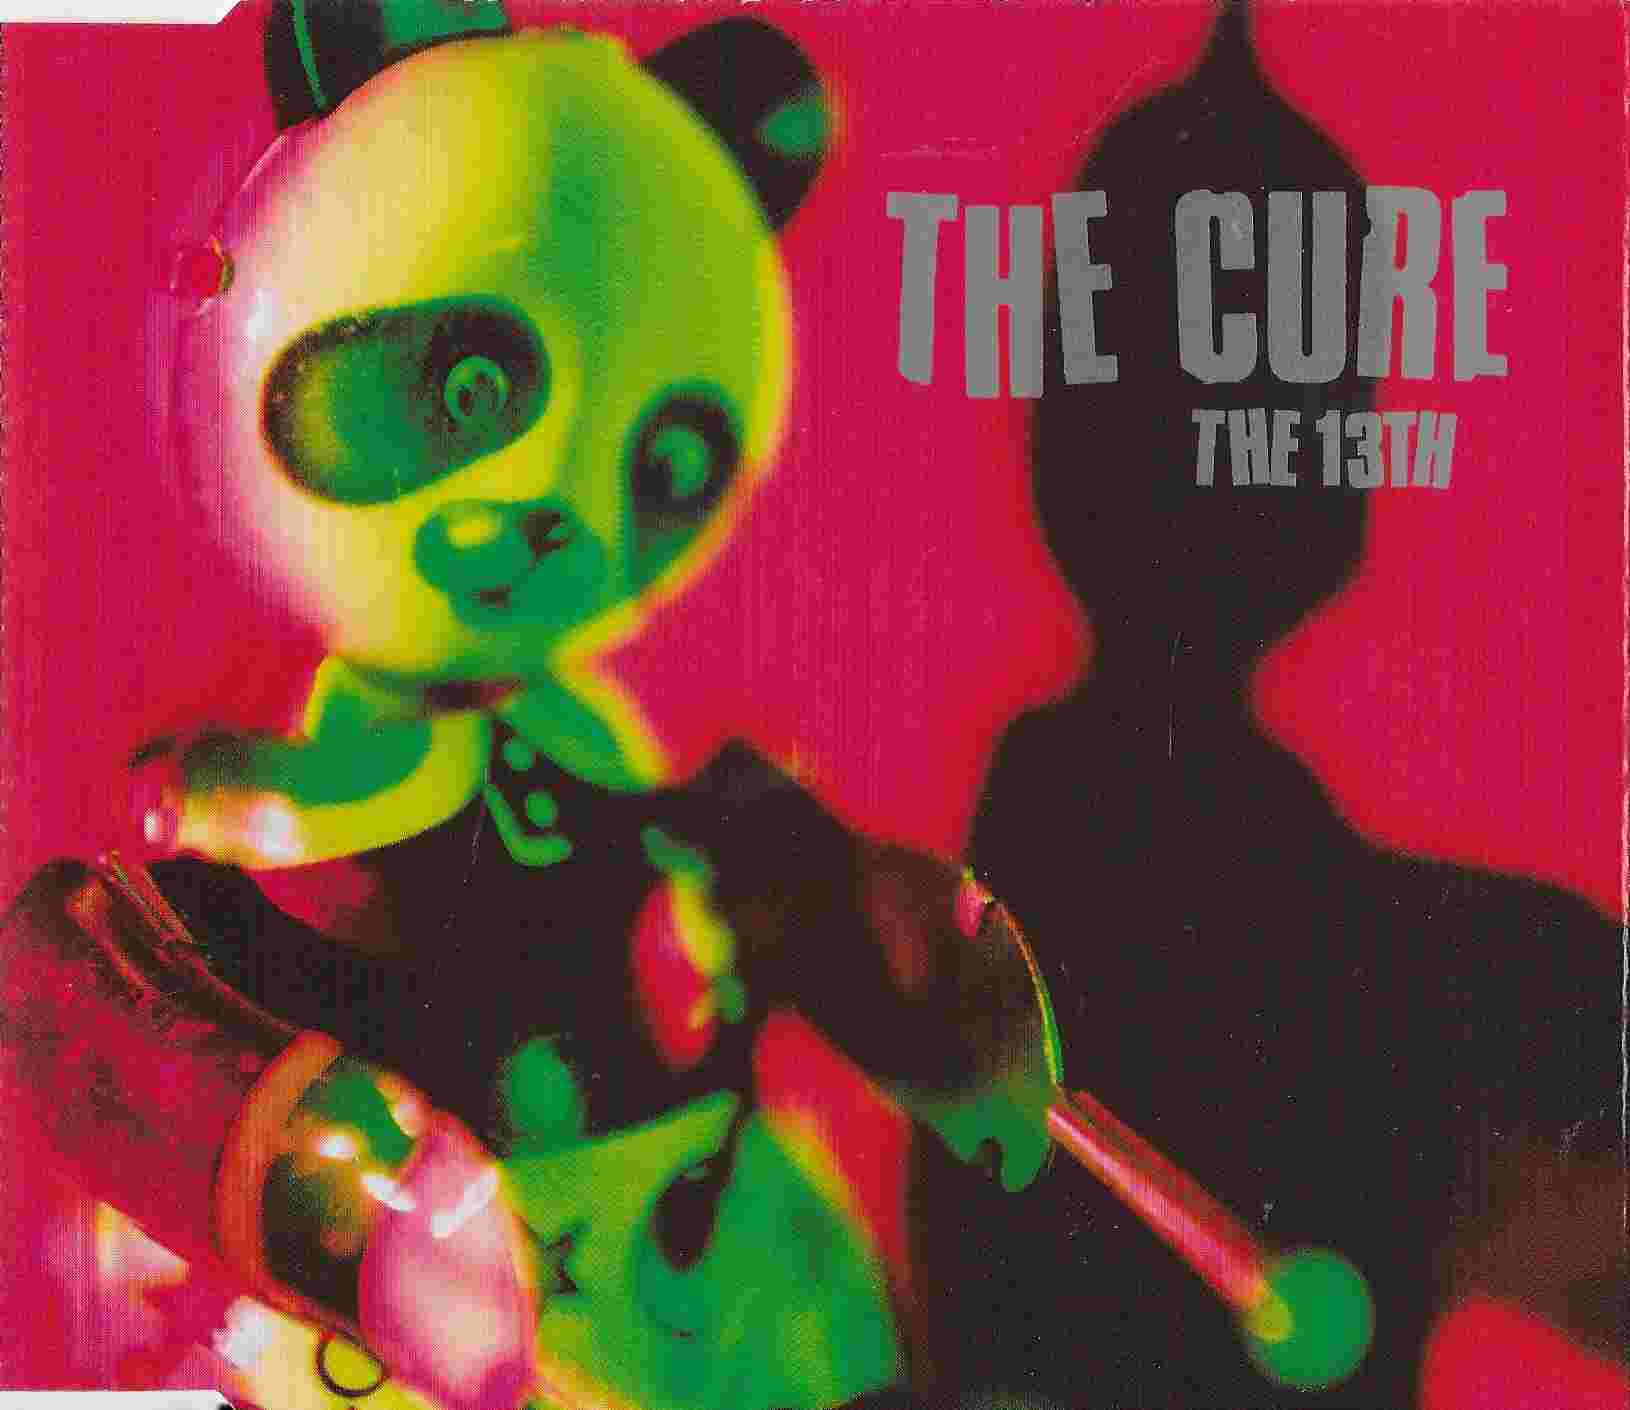 Picture of The 13th by artist The Cure 